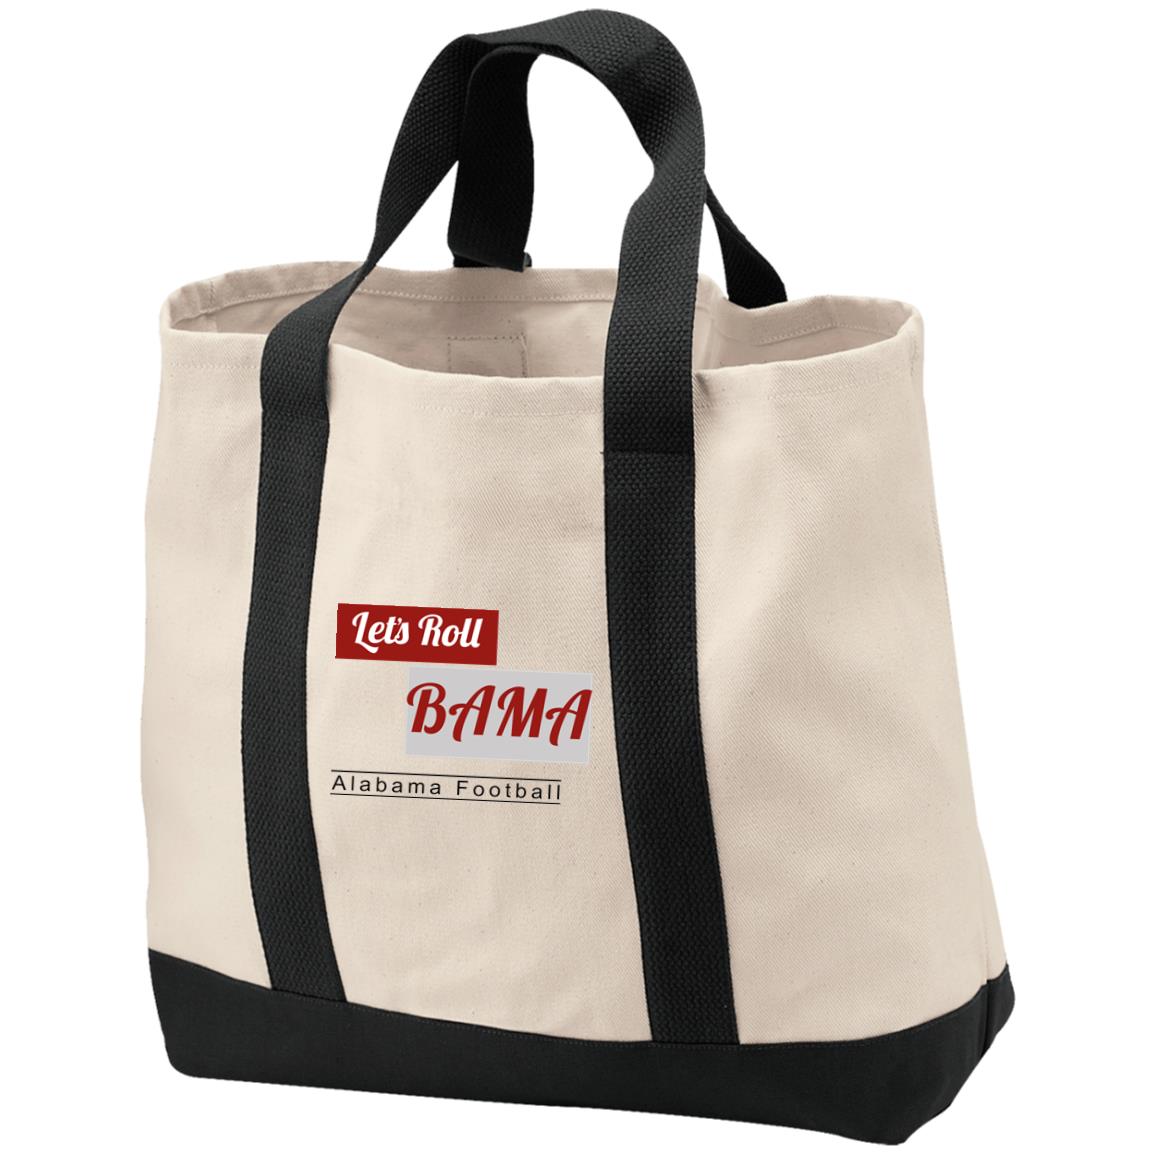 Let's Roll Bama 2-Tone Shopping Tote